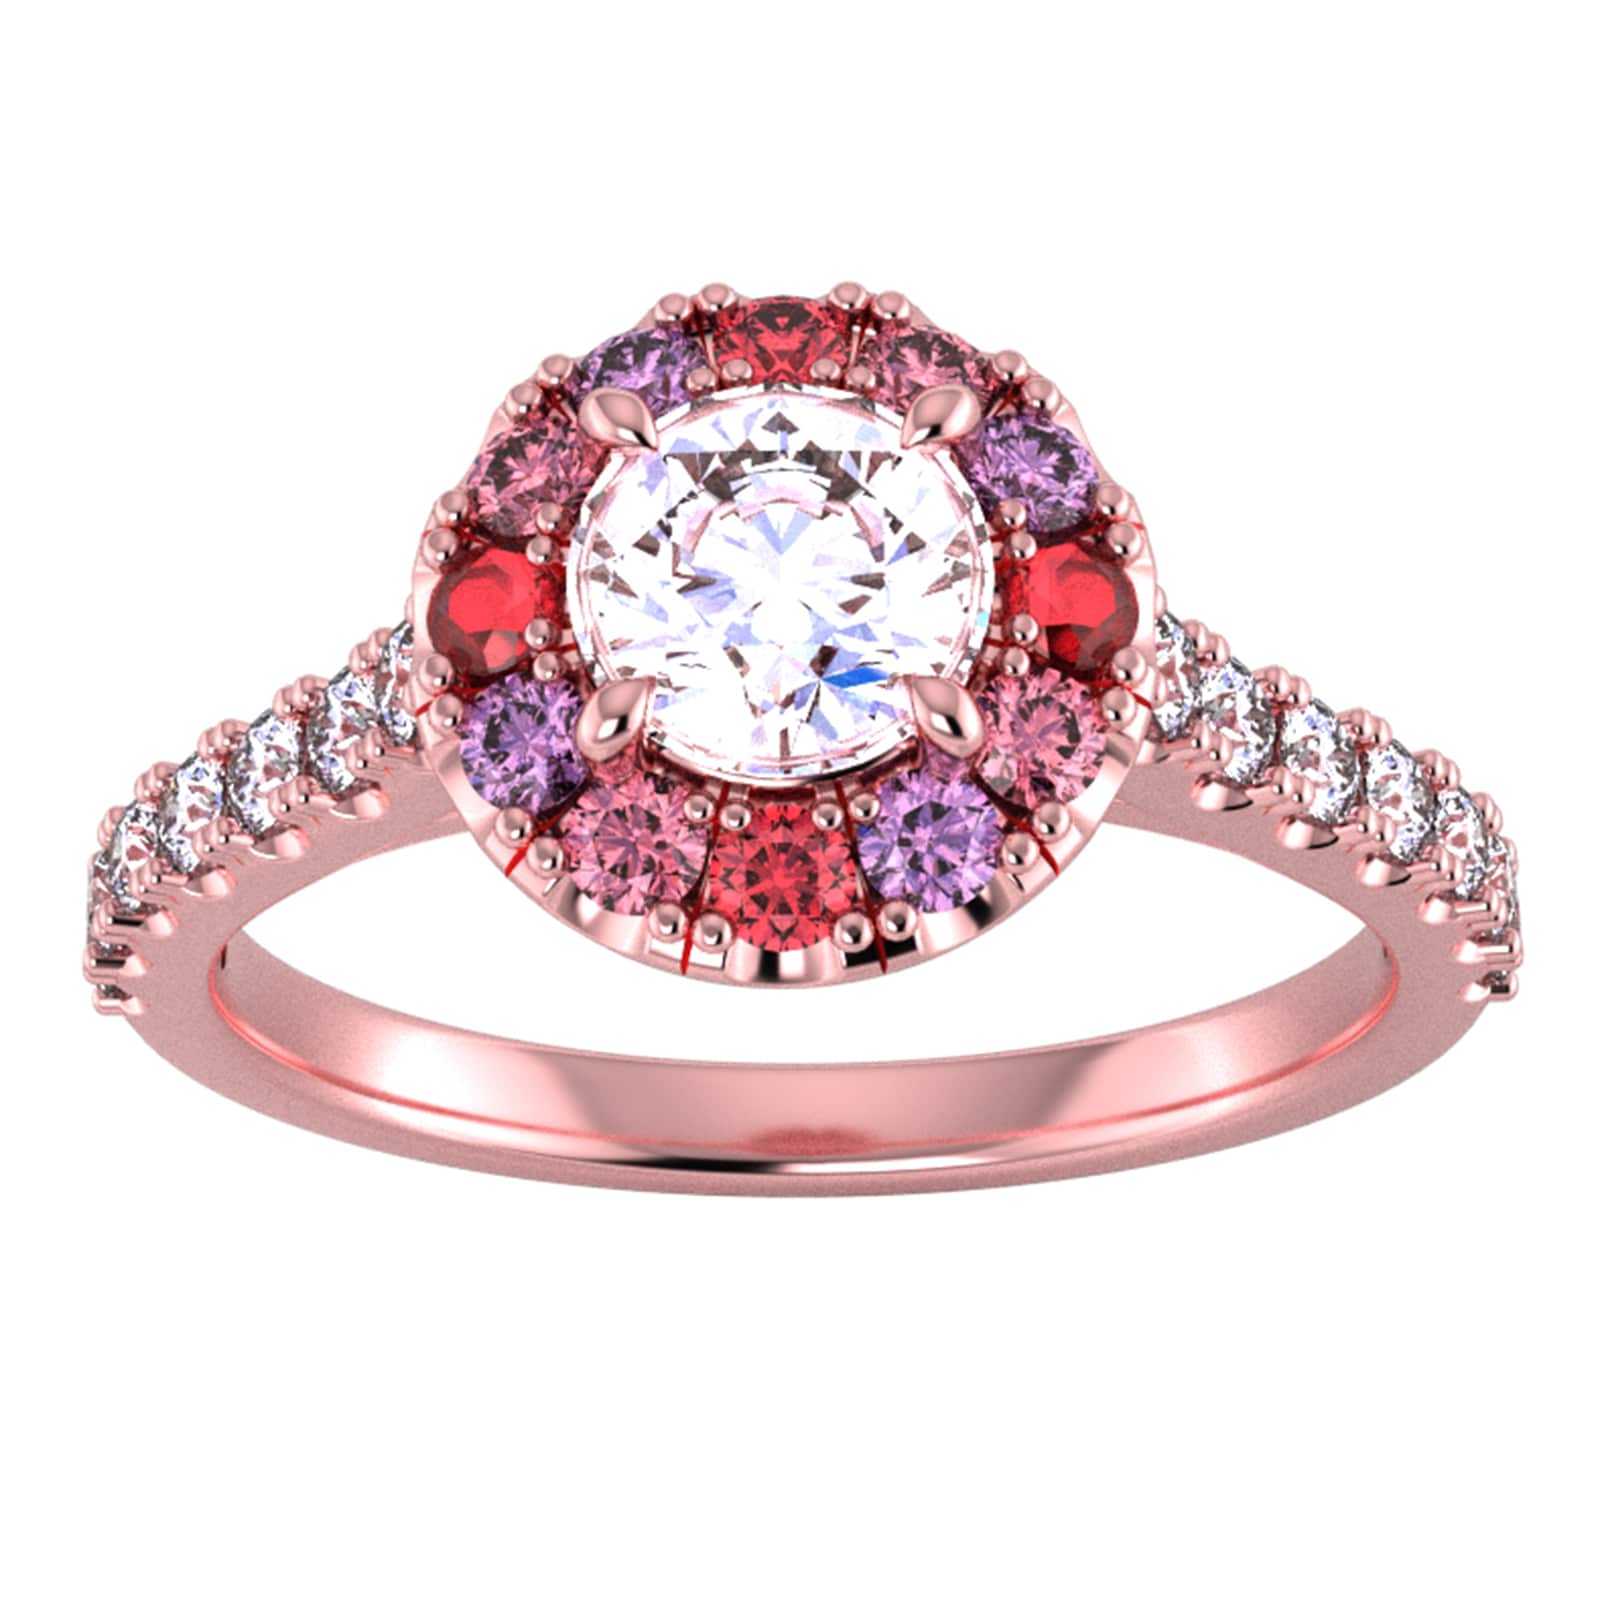 18ct Rose Gold Diamond & Pink, Red, Purple Sapphire Halo Ring - Ring Size E.5